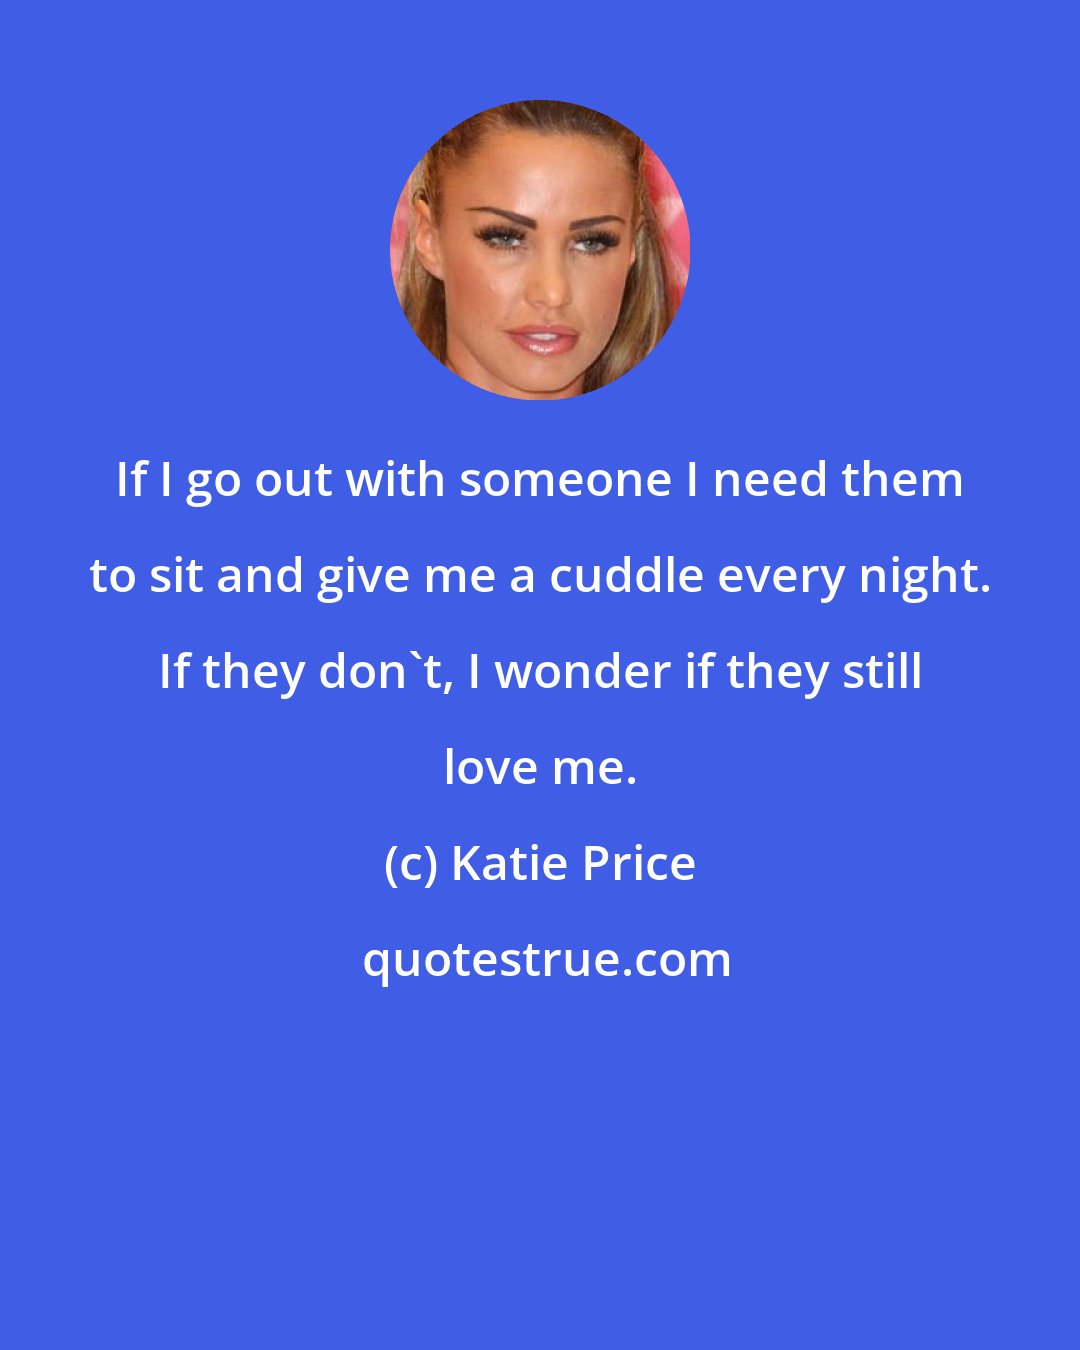 Katie Price: If I go out with someone I need them to sit and give me a cuddle every night. If they don't, I wonder if they still love me.